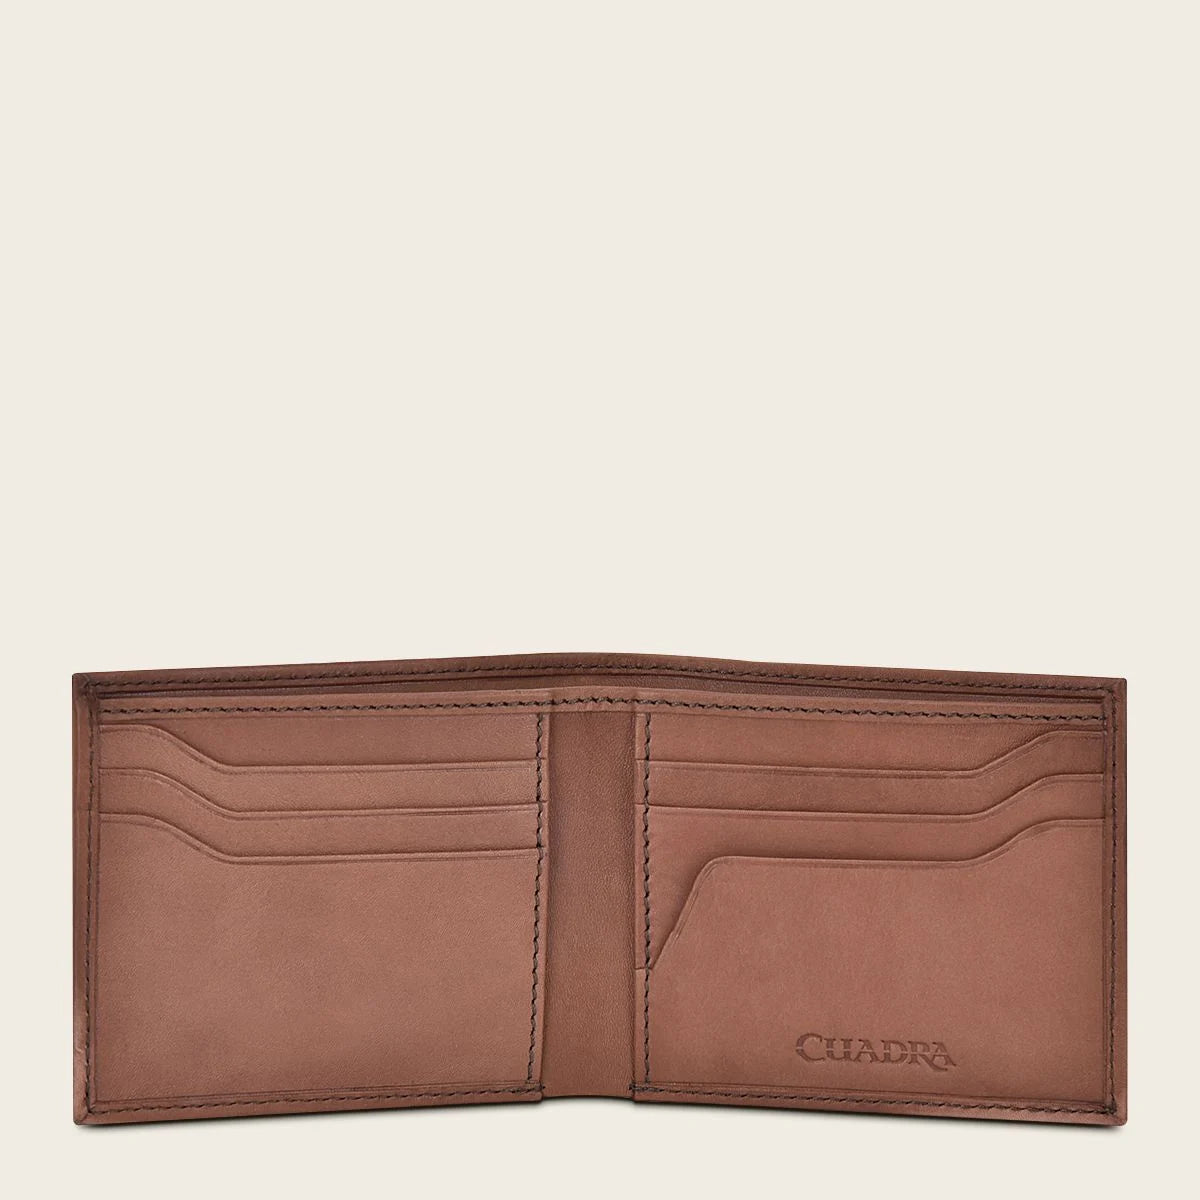 Brown bovine leather wallet with gradient color finish